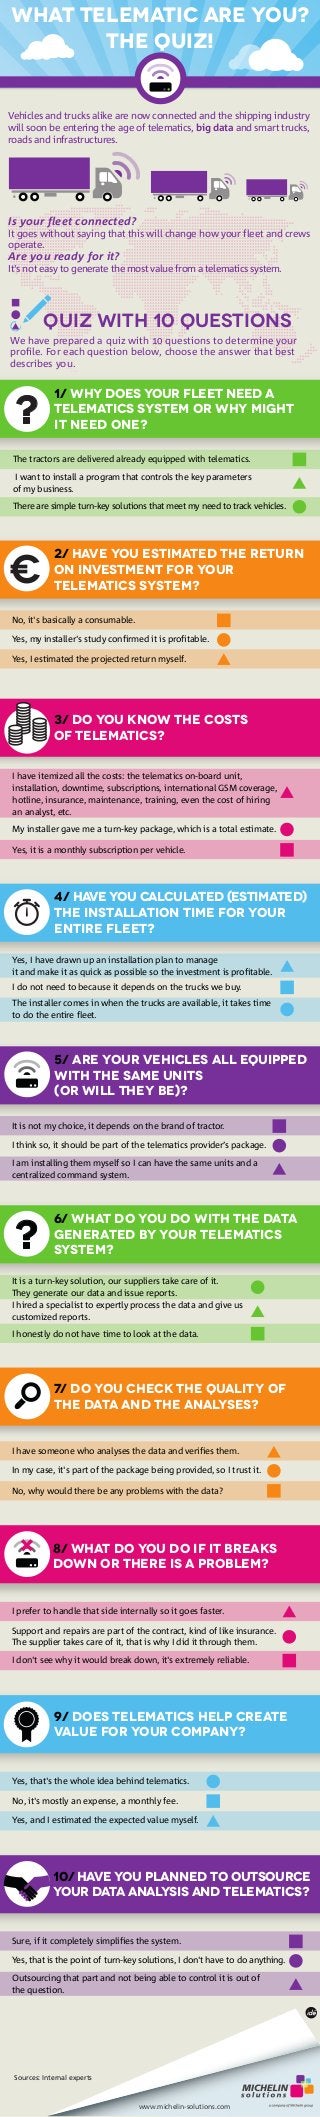 What telematic are you? 
Vehicles and trucks alike are now connected and the shipping industry 
will soon be entering the age of telematics, big data and smart trucks, 
roads and infrastructures. 
Is your fleet connected? 
It goes without saying that this will change how your fleet and crews 
operate. 
Are you ready for it? 
It's not easy to generate the most value from a telematics system. 
Quiz WITH 10 questions 
We have prepared a quiz with 10 questions to determine your 
profile. For each question below, choose the answer that best 
describes you. 
I want to install a program that controls the key parameters 
of my business. 
2/ Have you estimated the return 
on investment for your 
telematics system? 
No, it's basically a consumable. 
Yes, my installer's study confirmed it is profitable. 
Yes, I estimated the projected return myself. 
3/ Do you know the costs 
of telematics? 
I have itemized all the costs: the telematics on-board unit, 
installation, downtime, subscriptions, international GSM coverage, 
hotline, insurance, maintenance, training, even the cost of hiring 
an analyst, etc. 
My installer gave me a turn-key package, which is a total estimate. 
Yes, it is a monthly subscription per vehicle. 
Yes, I have drawn up an installation plan to manage 
it and make it as quick as possible so the investment is profitable. 
It is a turn-key solution, our suppliers take care of it. 
They generate our data and issue reports. 
I hired a specialist to expertly process the data and give us 
customized reports. 
7/ Do you check the quality of 
the data and the analyses? 
I have someone who analyses the data and verifies them. 
In my case, it's part of the package being provided, so I trust it. 
No, why would there be any problems with the data? 
8/ What do you do if it breaks 
down or there is a problem? 
I prefer to handle that side internally so it goes faster. 
Support and repairs are part of the contract, kind of like insurance. 
The supplier takes care of it, that is why I did it through them. 
I don't see why it would break down, it's extremely reliable. 
Yes, that's the whole idea behind telematics. 
Sources: Internal experts 
www.michelin-solutions.com 
? 
€ 
? 
The quiz! 
1/ Why does your fleet need a 
telematics system or why might 
it need one? 
The tractors are delivered already equipped with telematics. 
There are simple turn-key solutions that meet my need to track vehicles. 
4/ Have you calculated (estimated) 
the installation time for your 
entire fleet? 
I do not need to because it depends on the trucks we buy. 
The installer comes in when the trucks are available, it takes time 
to do the entire fleet. 
5/ Are your vehicles all equipped 
with the same units 
(or will they be)? 
It is not my choice, it depends on the brand of tractor. 
I think so, it should be part of the telematics provider’s package. 
I am installing them myself so I can have the same units and a 
centralized command system. 
6/ What do you do with the data 
generated by your telematics 
system? 
I honestly do not have time to look at the data. 
9/ Does telematics help create 
value for your company? 
No, it's mostly an expense, a monthly fee. 
Yes, and I estimated the expected value myself. 
10/ Have you planned to outsource 
your data analysis and telematics? 
Sure, if it completely simplifies the system. 
Yes, that is the point of turn-key solutions, I don't have to do anything. 
Outsourcing that part and not being able to control it is out of 
the question. 
